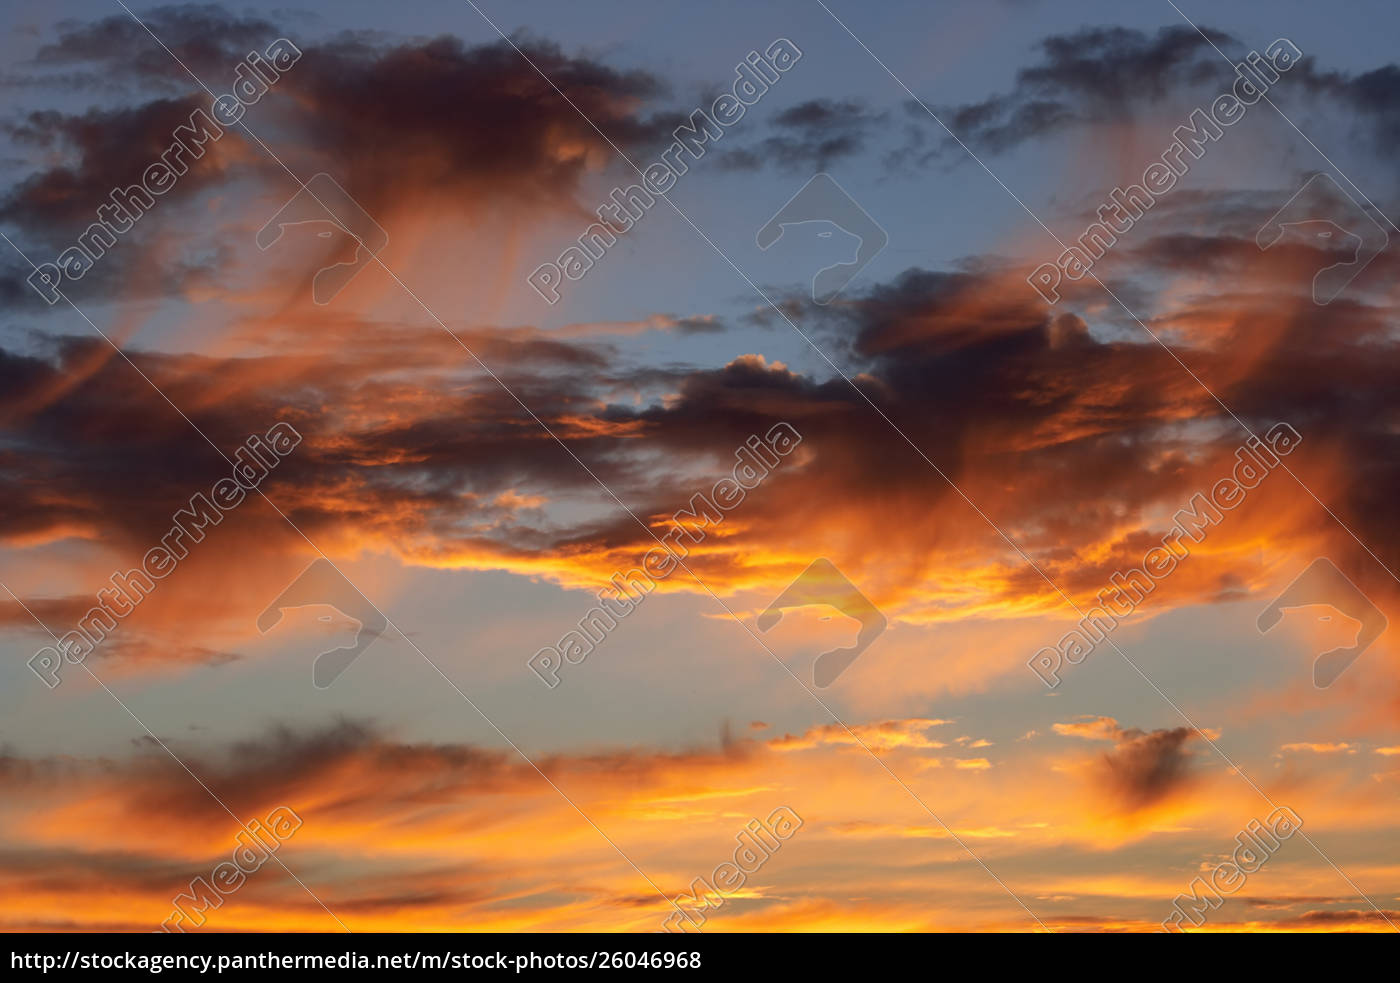 Sunset Clouds Royalty Free Photo Panthermedia Stock Agency